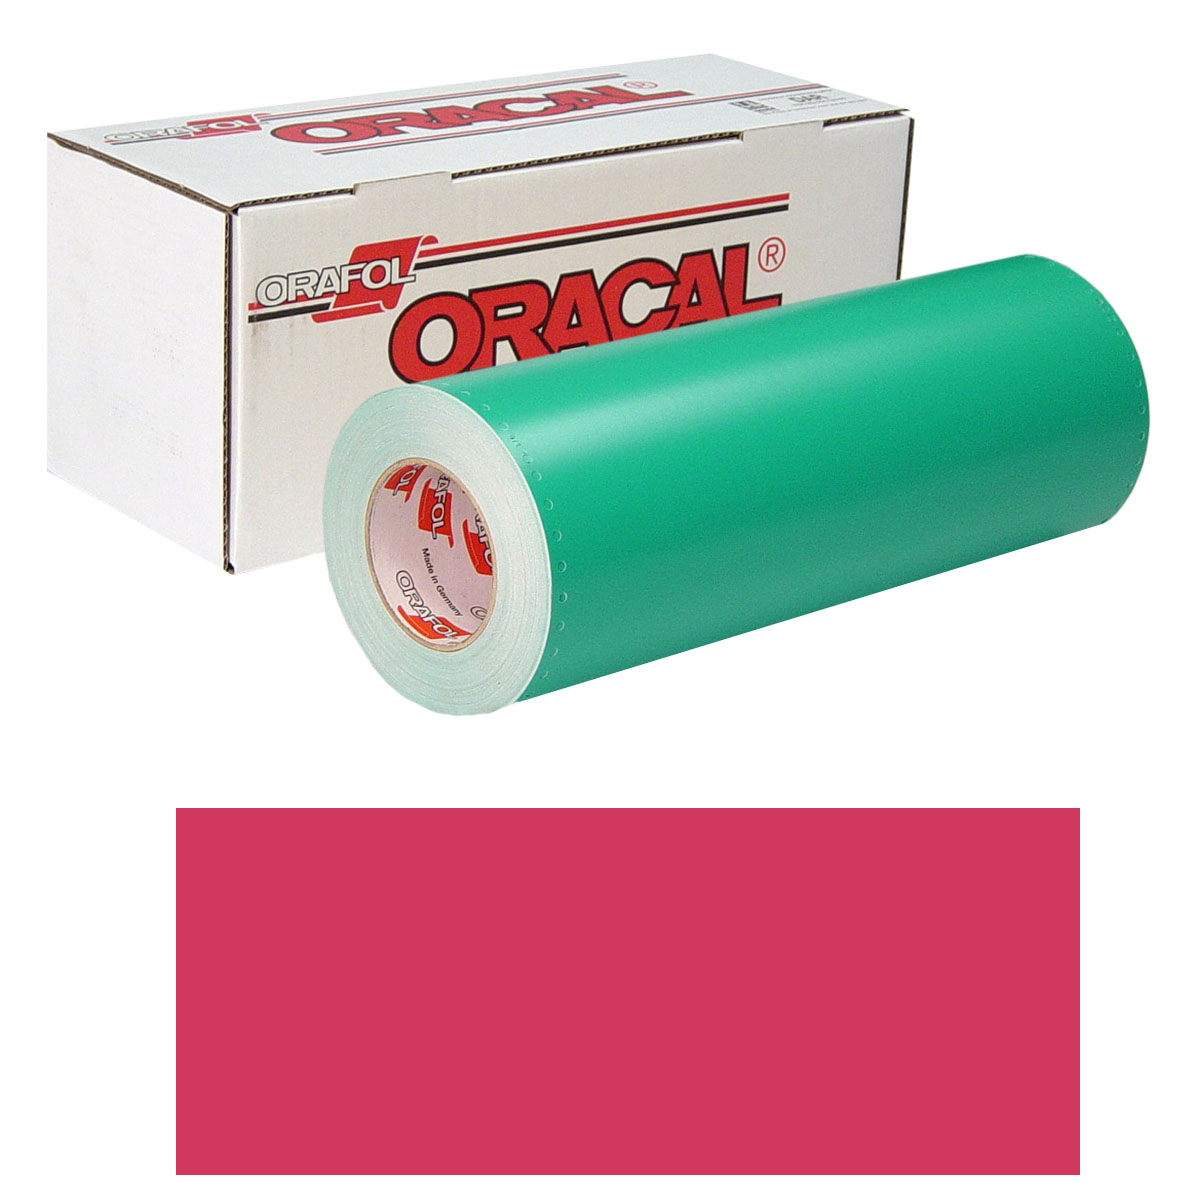 ORACAL 8500 30in X 50yd 032 Light Red